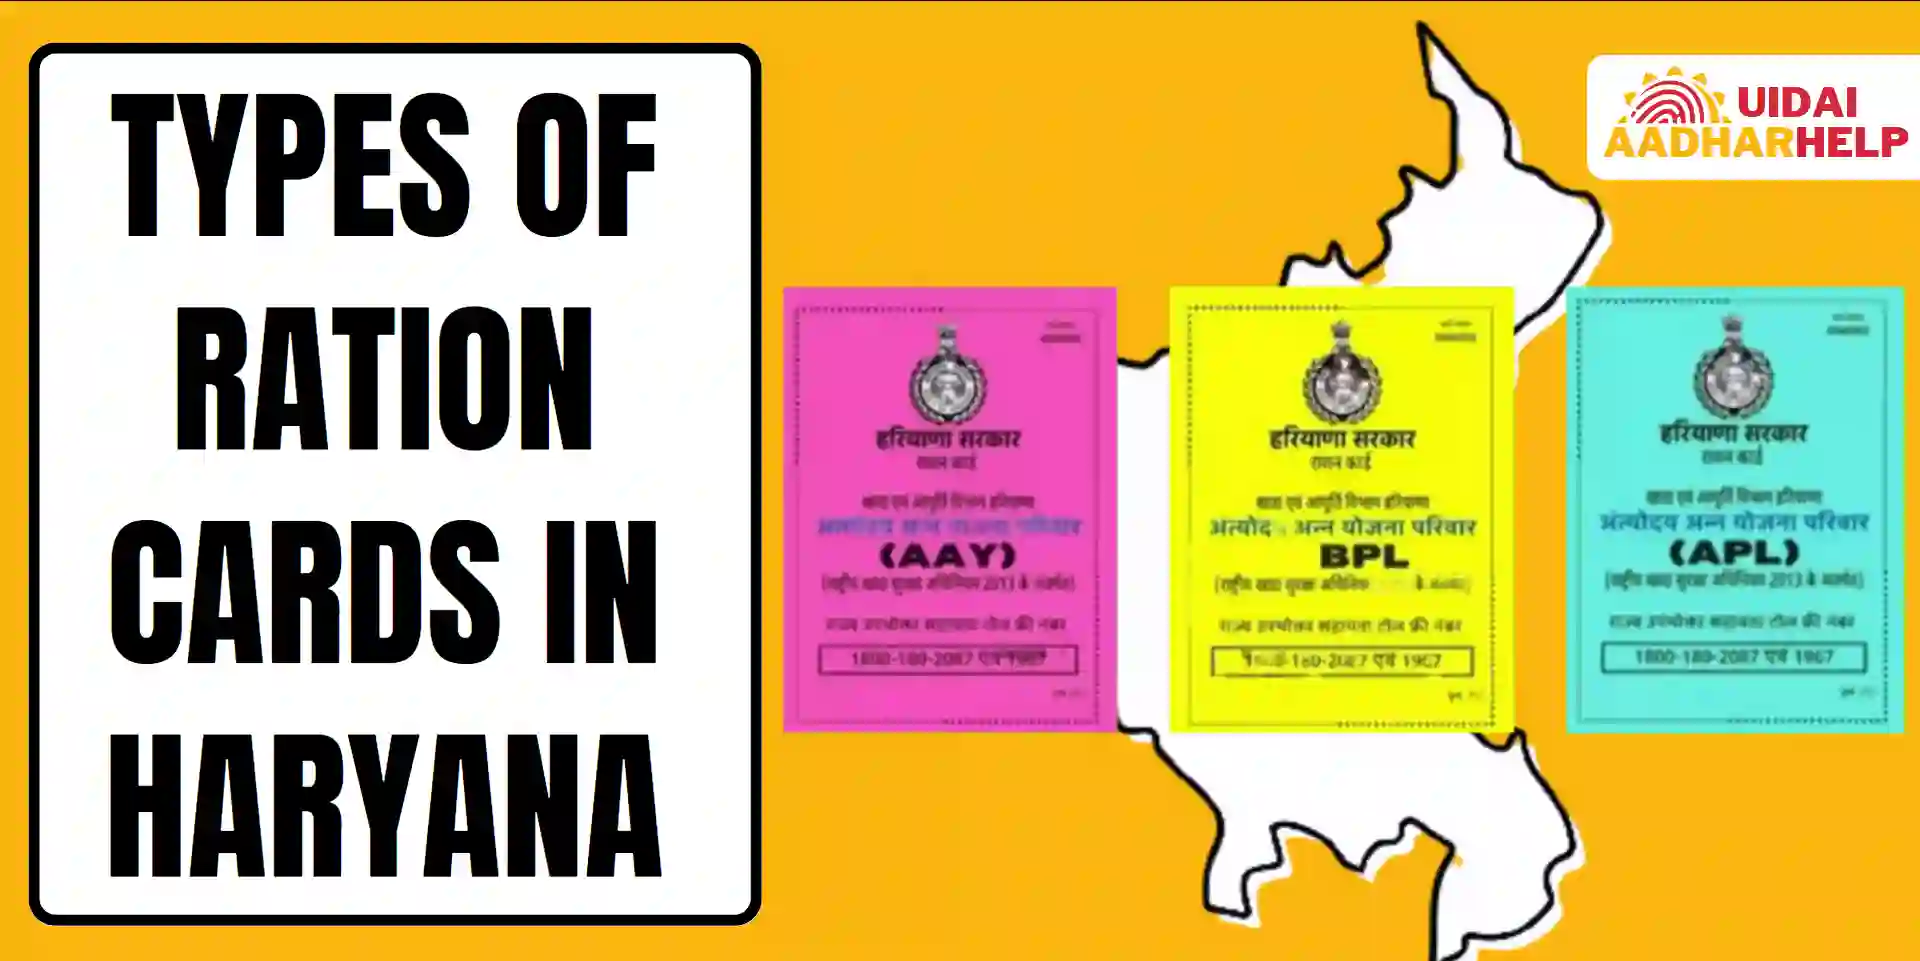 Types of Ration Cards in Haryana